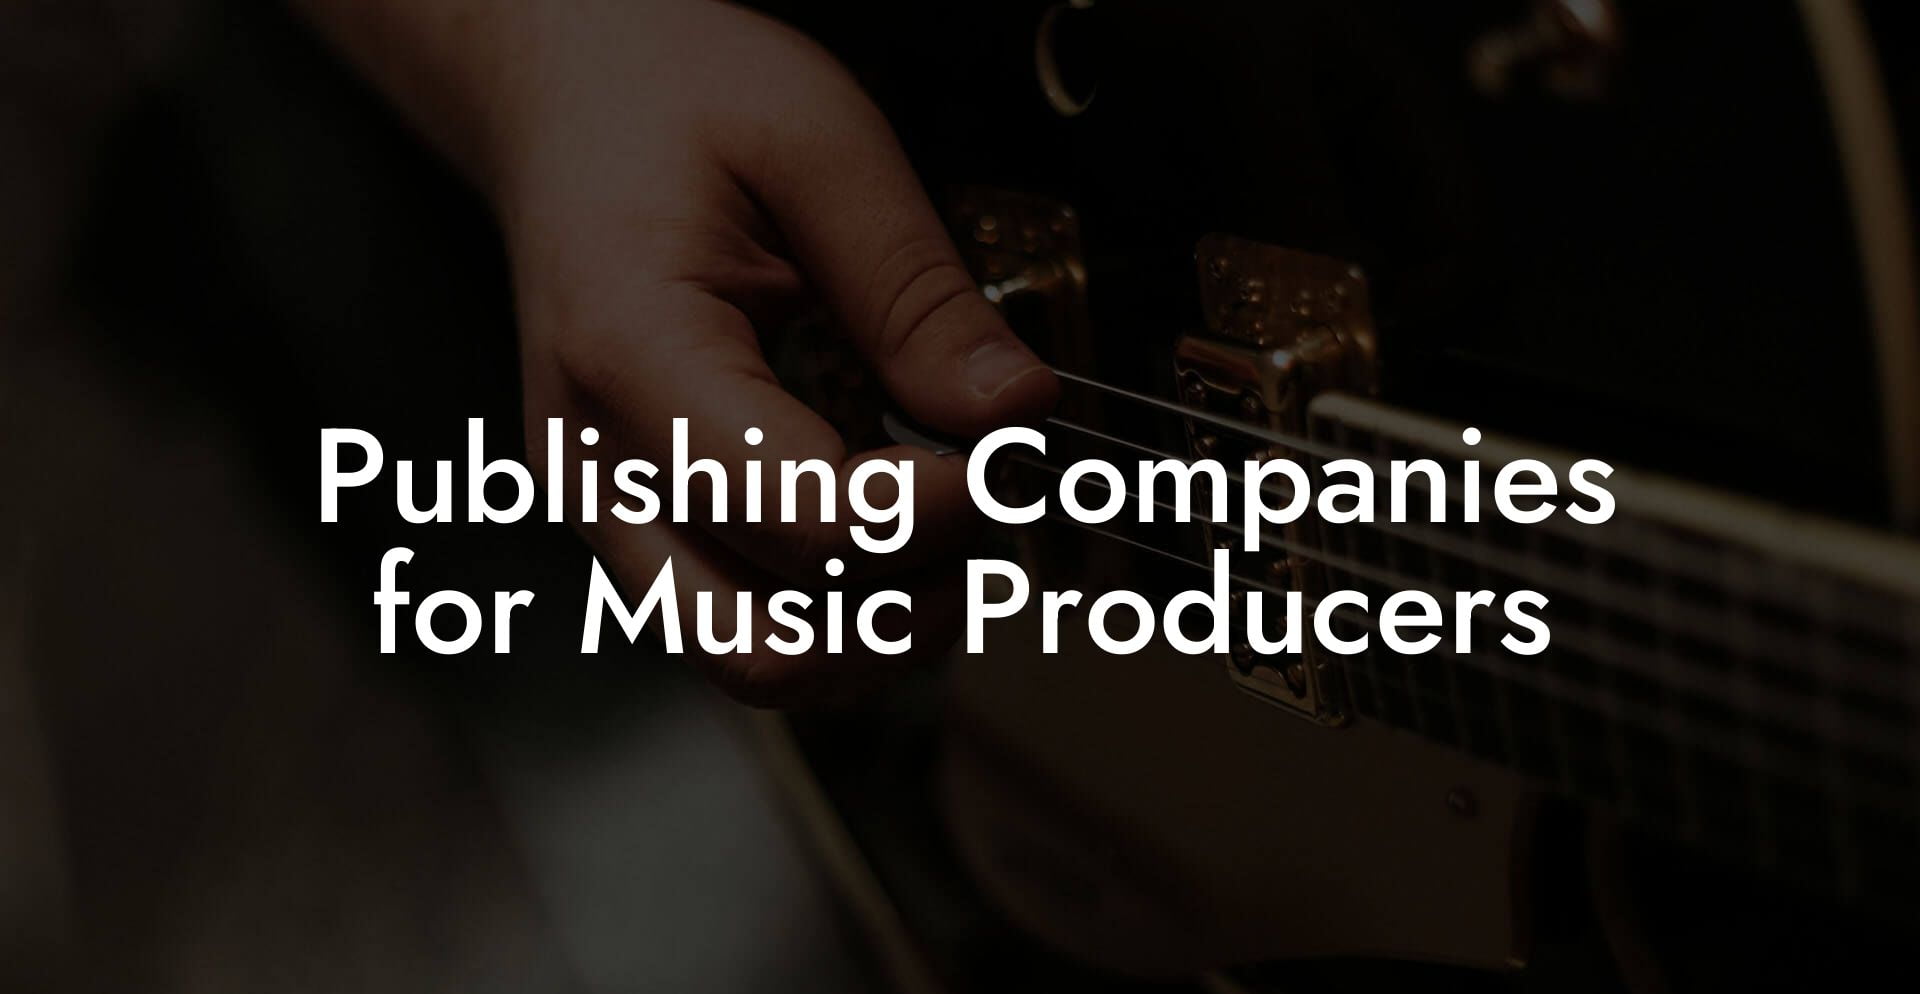 Publishing Companies for Music Producers